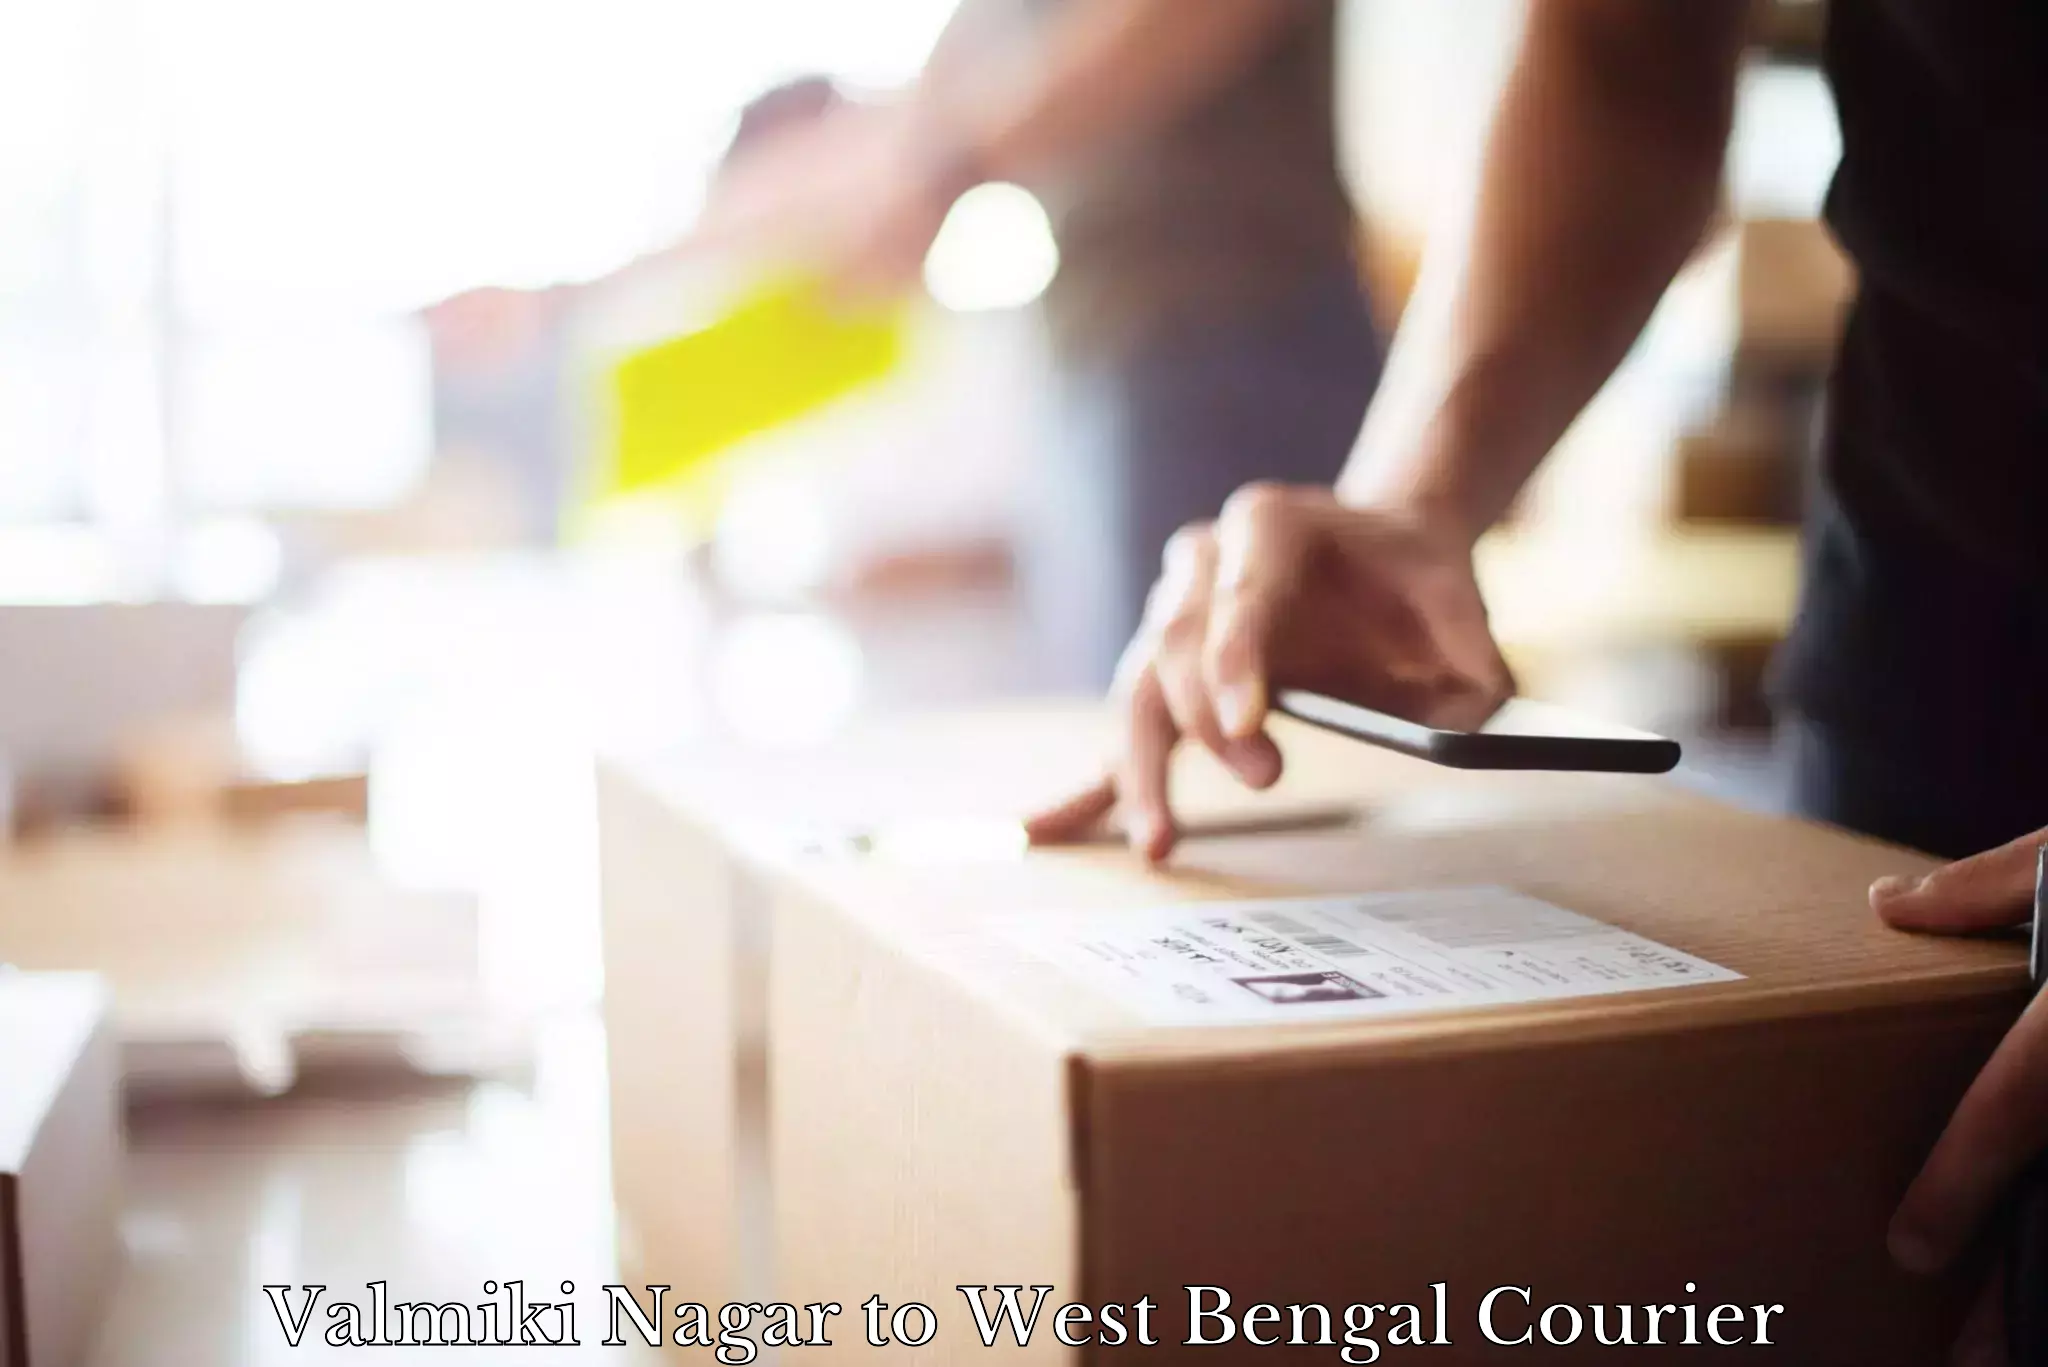 Courier service innovation in Valmiki Nagar to Hooghly